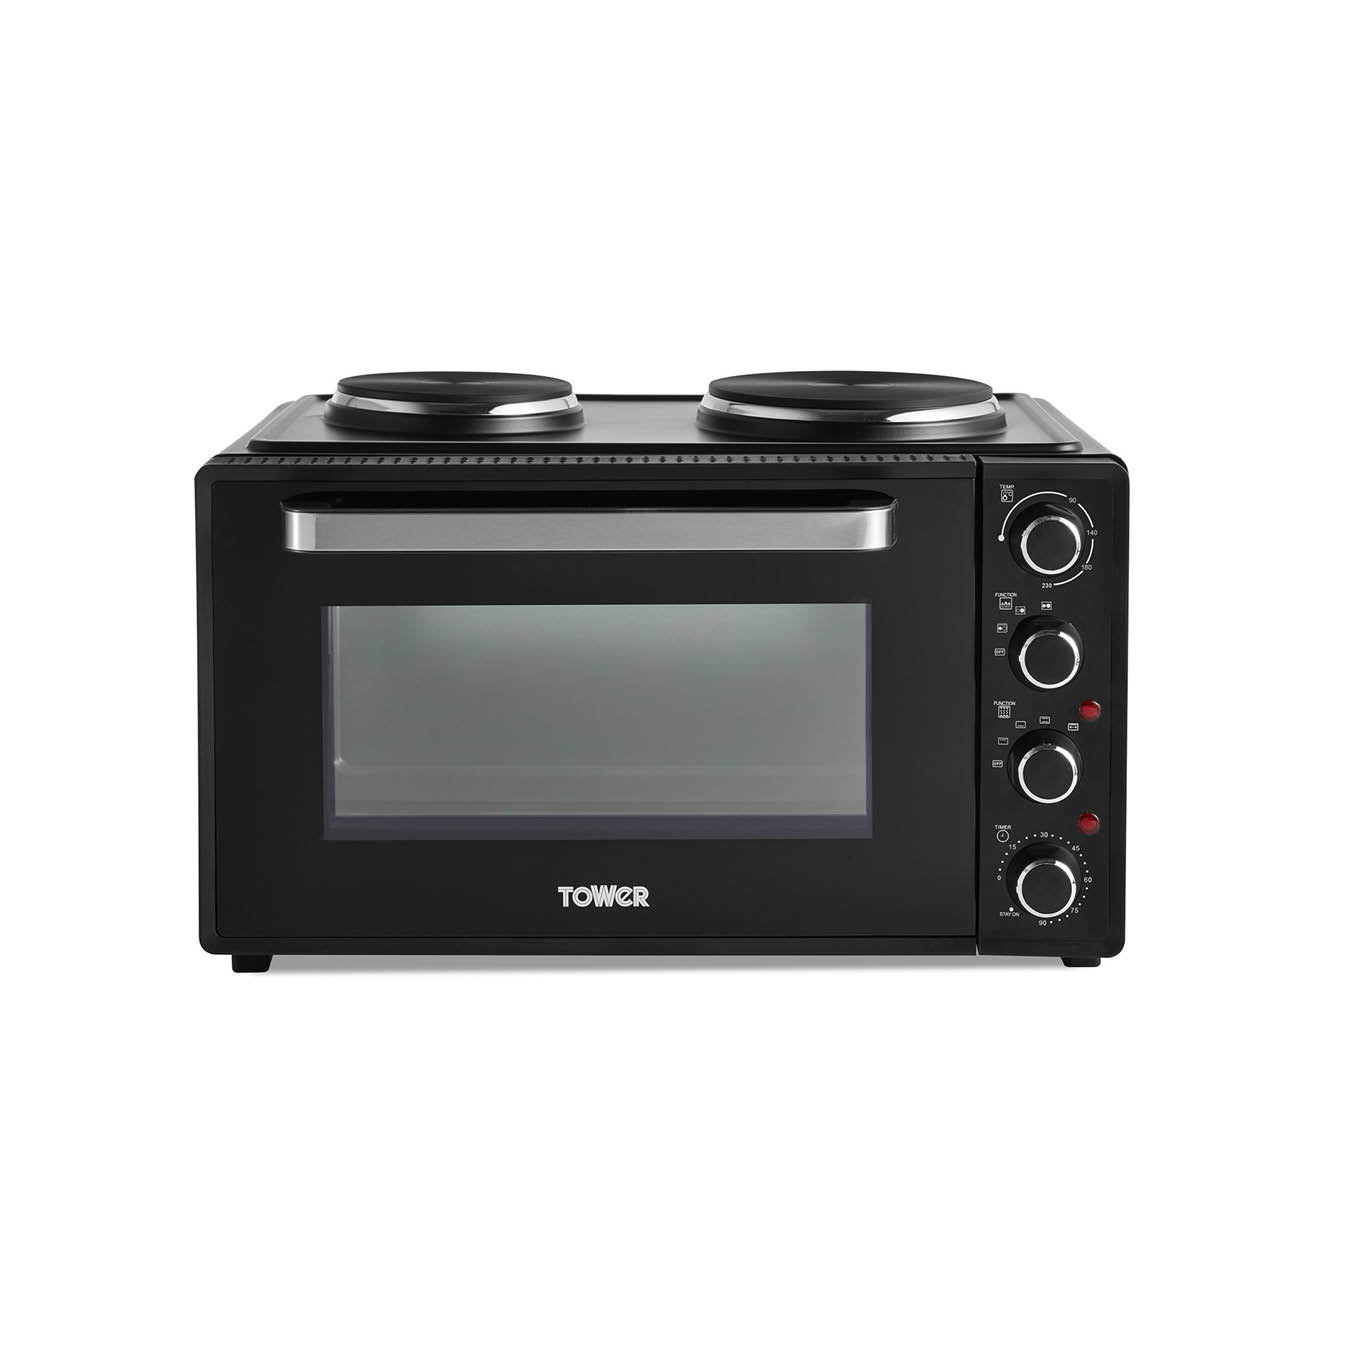 Claire Prestigieus Gezichtsvermogen Tower T14045 Mini Oven with Adjustable Temperature Control, 90 Minute  Timer, Baking Tray and Wire Rack, Black with Silver Accents, 42 litre &  Reviews | Wayfair.co.uk